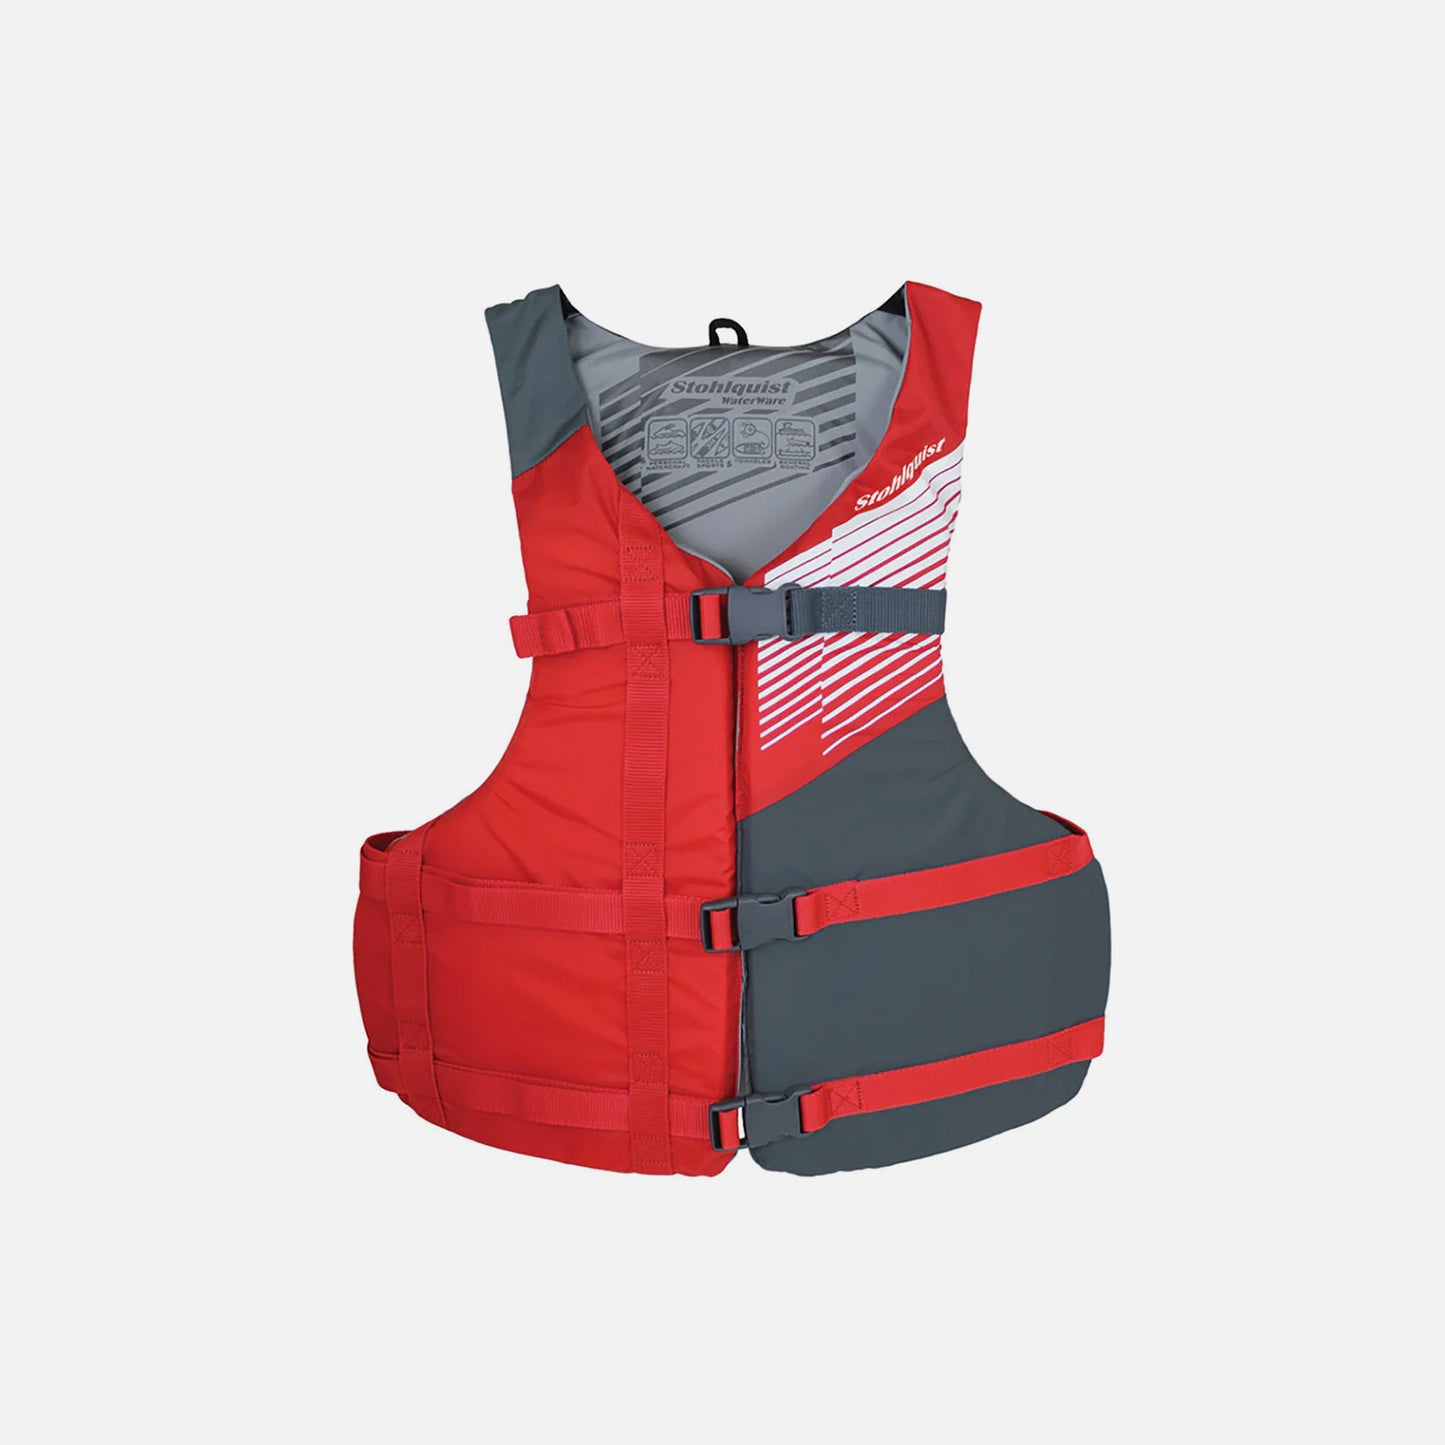 Youth Fit Life Jacket